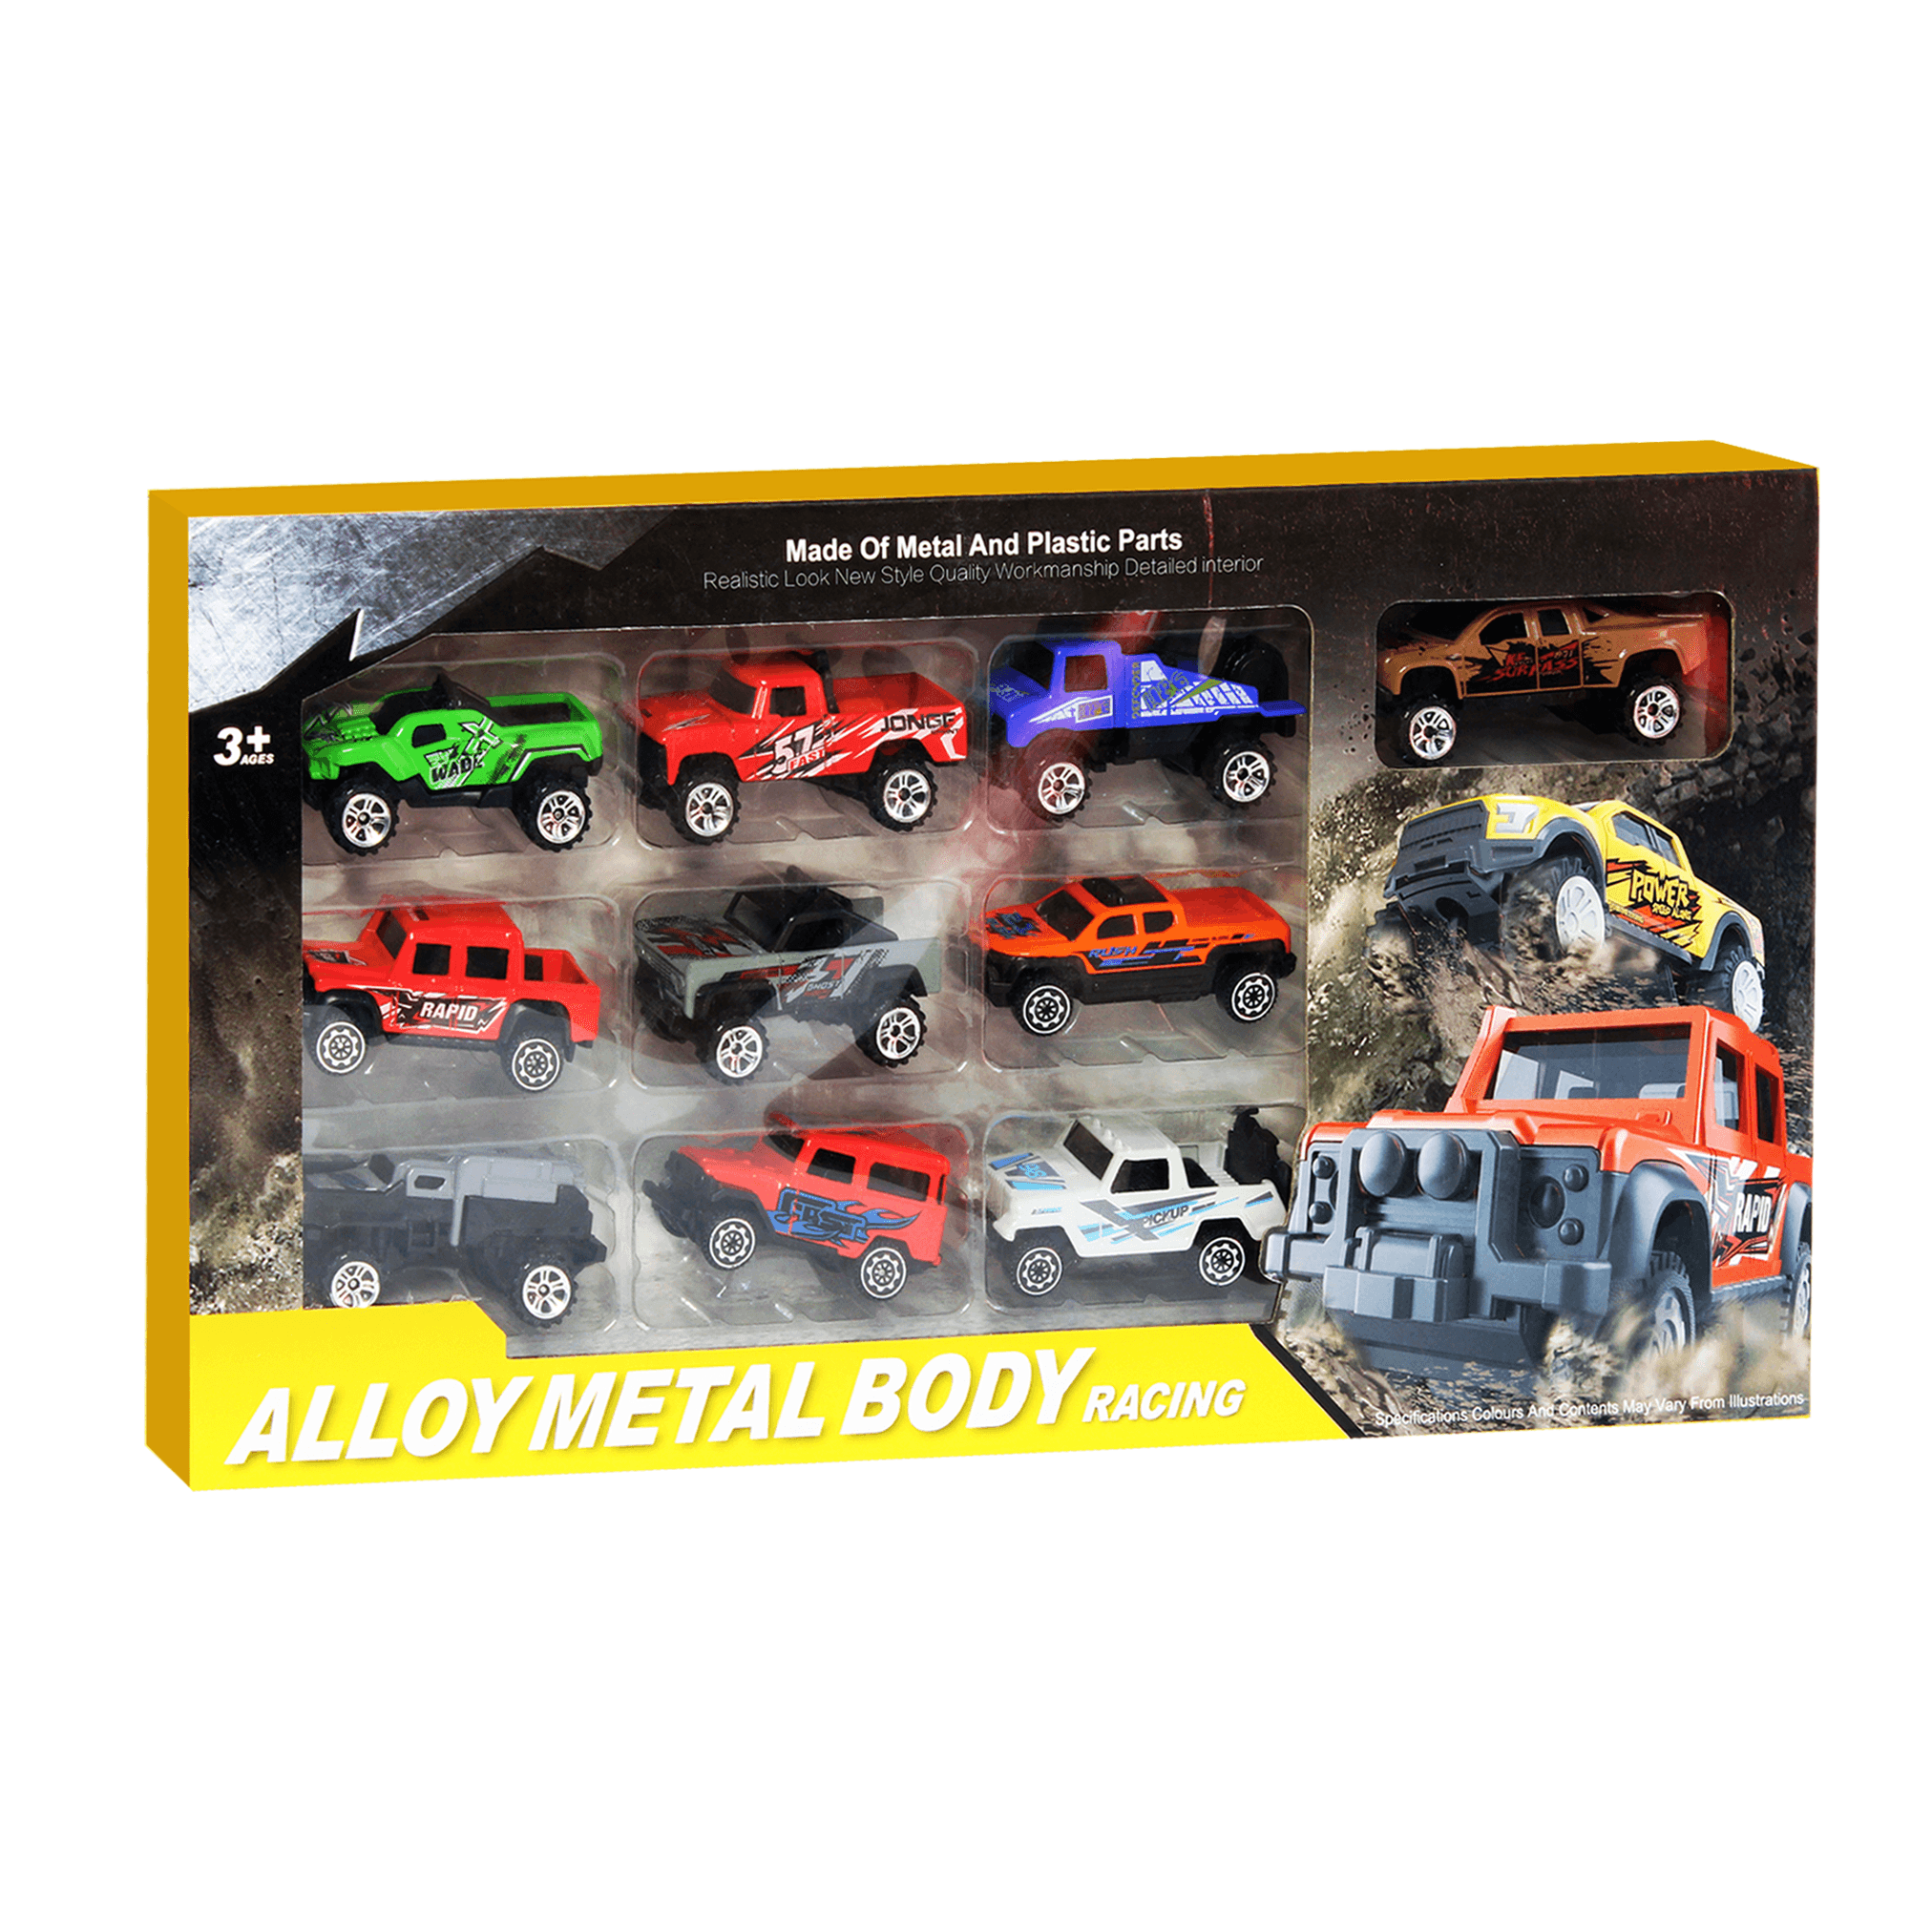 E-More Toy Cars for Kids 10 Pack Racing Cars Toy Set Metal Toy Car Model Vehicle Set for Toddlers